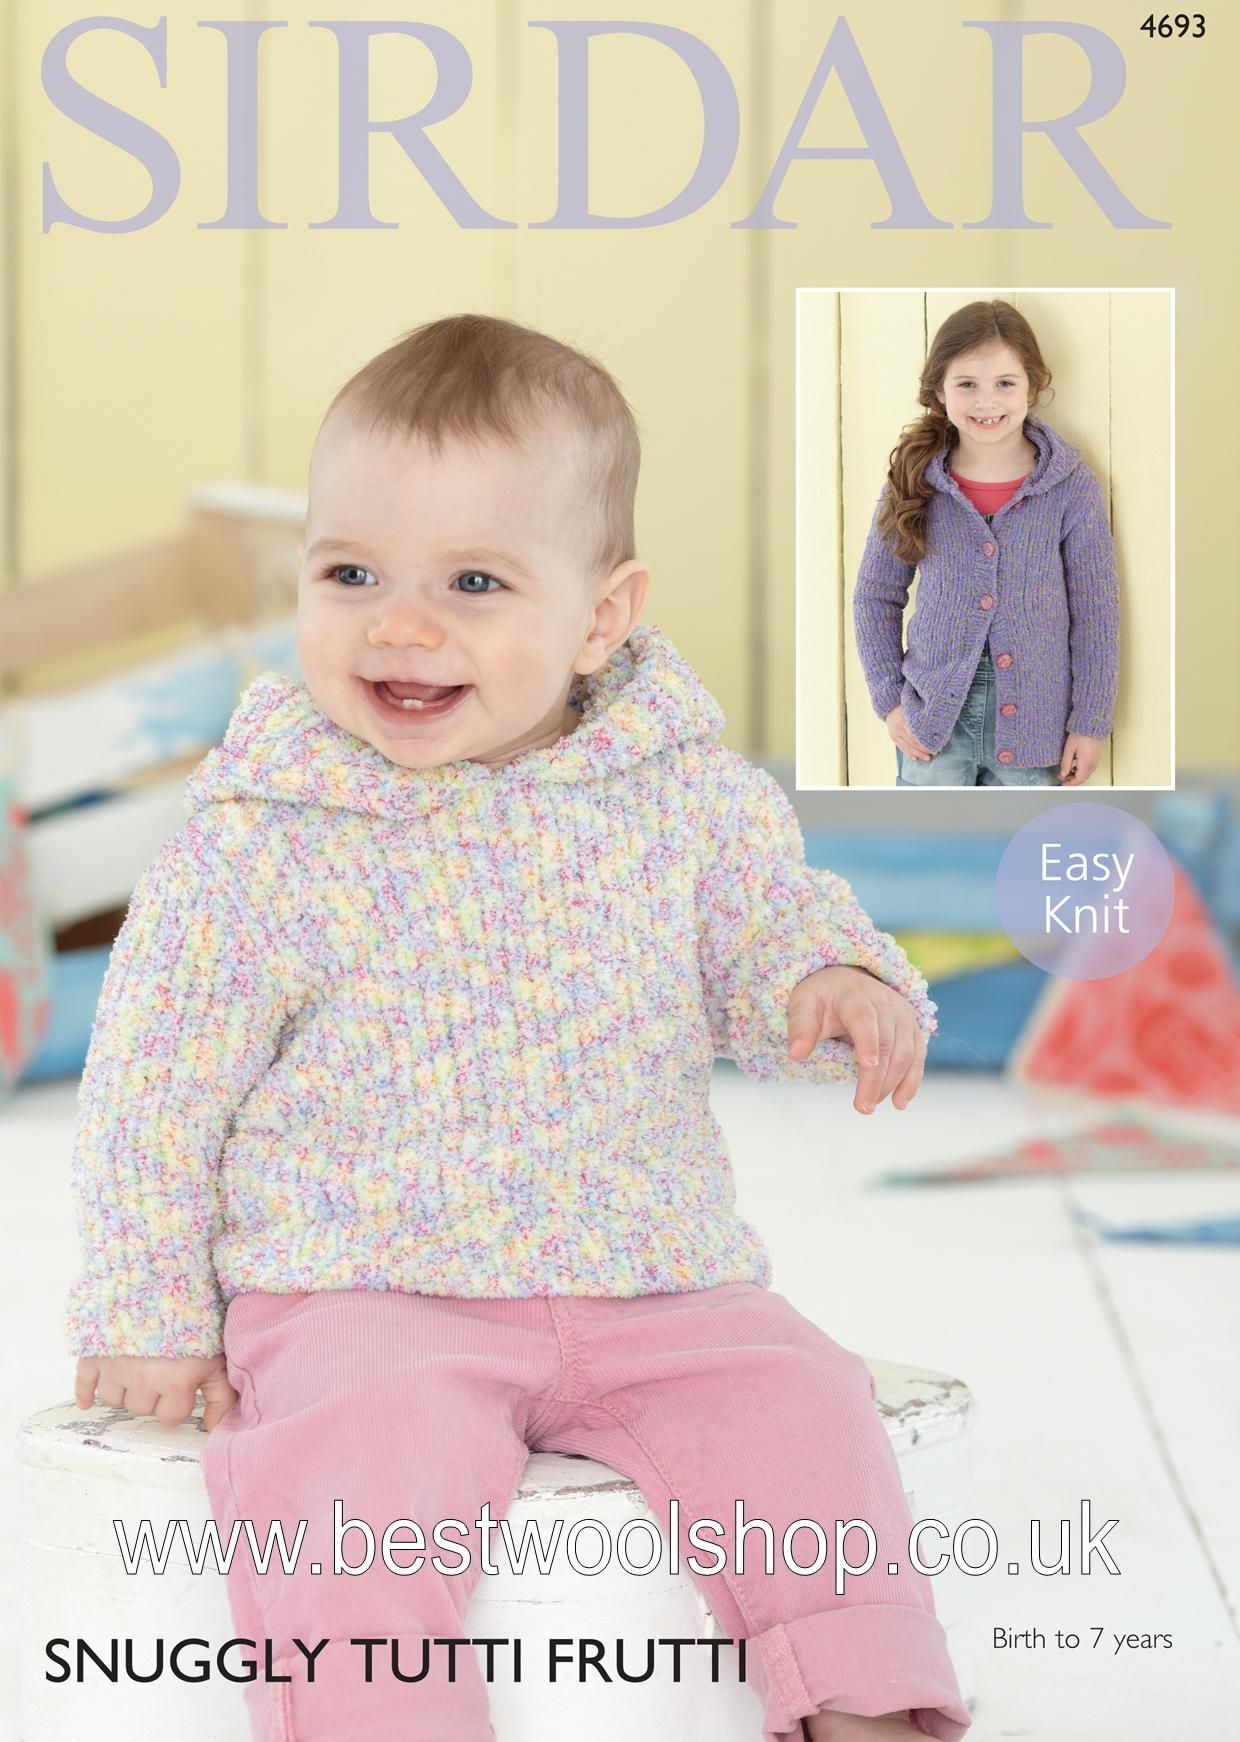 Sirdar Snuggly Knitting Patterns 4693 Sirdar Snuggly Tutti Frutti Chunky Hooded Sweater Cardigan Knitting Pattern To Fit 0 To 7 Years